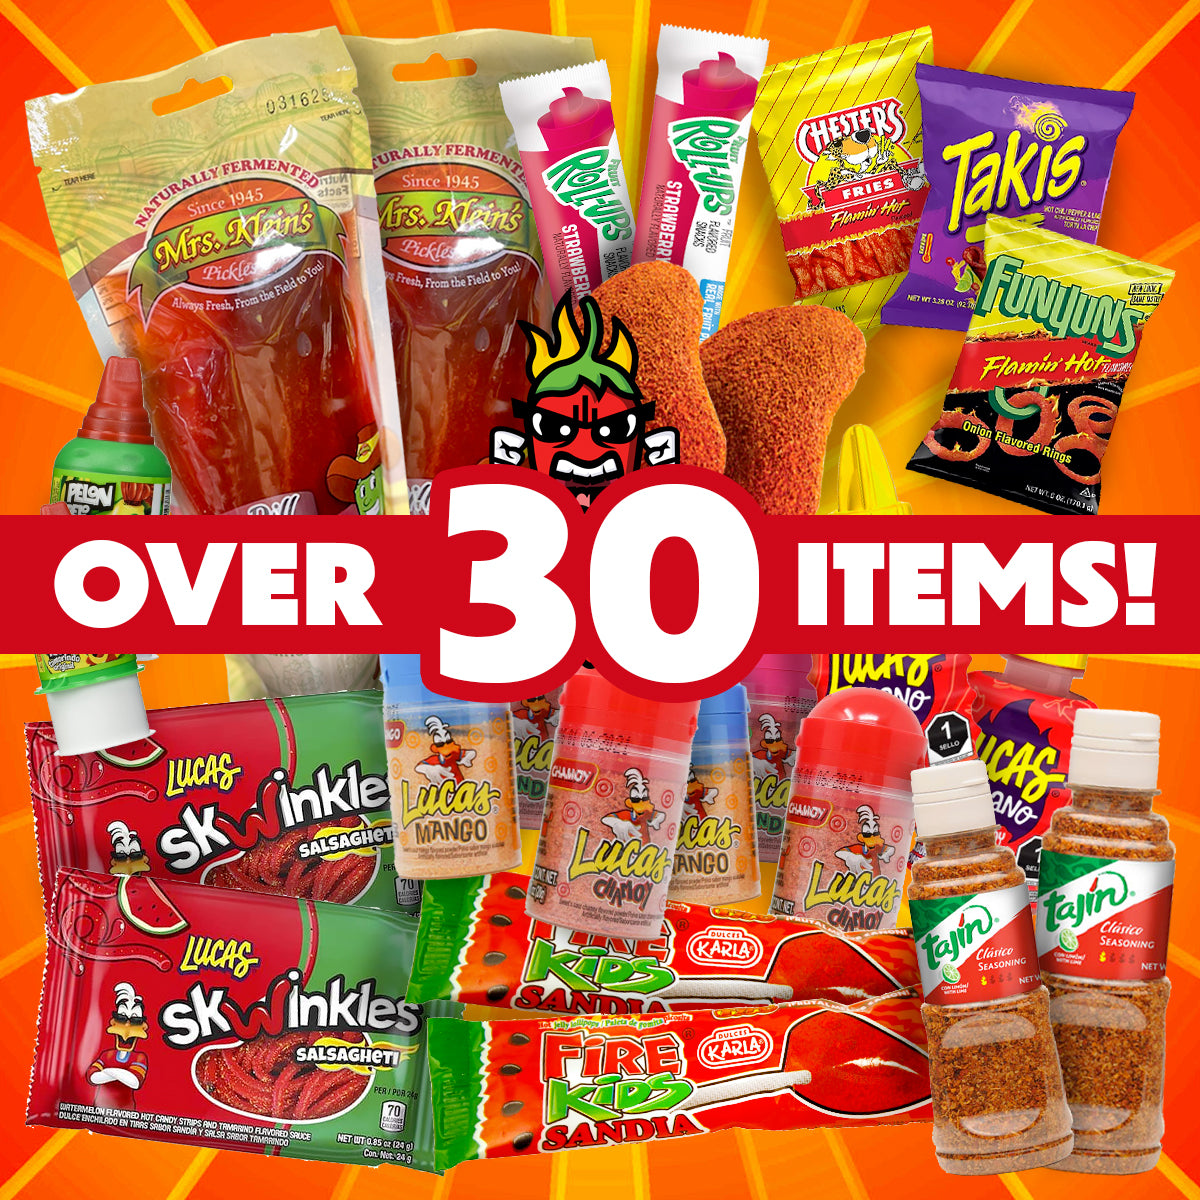 Chili Treats Spicy Pickle Kit Bundle with Over 30 Items